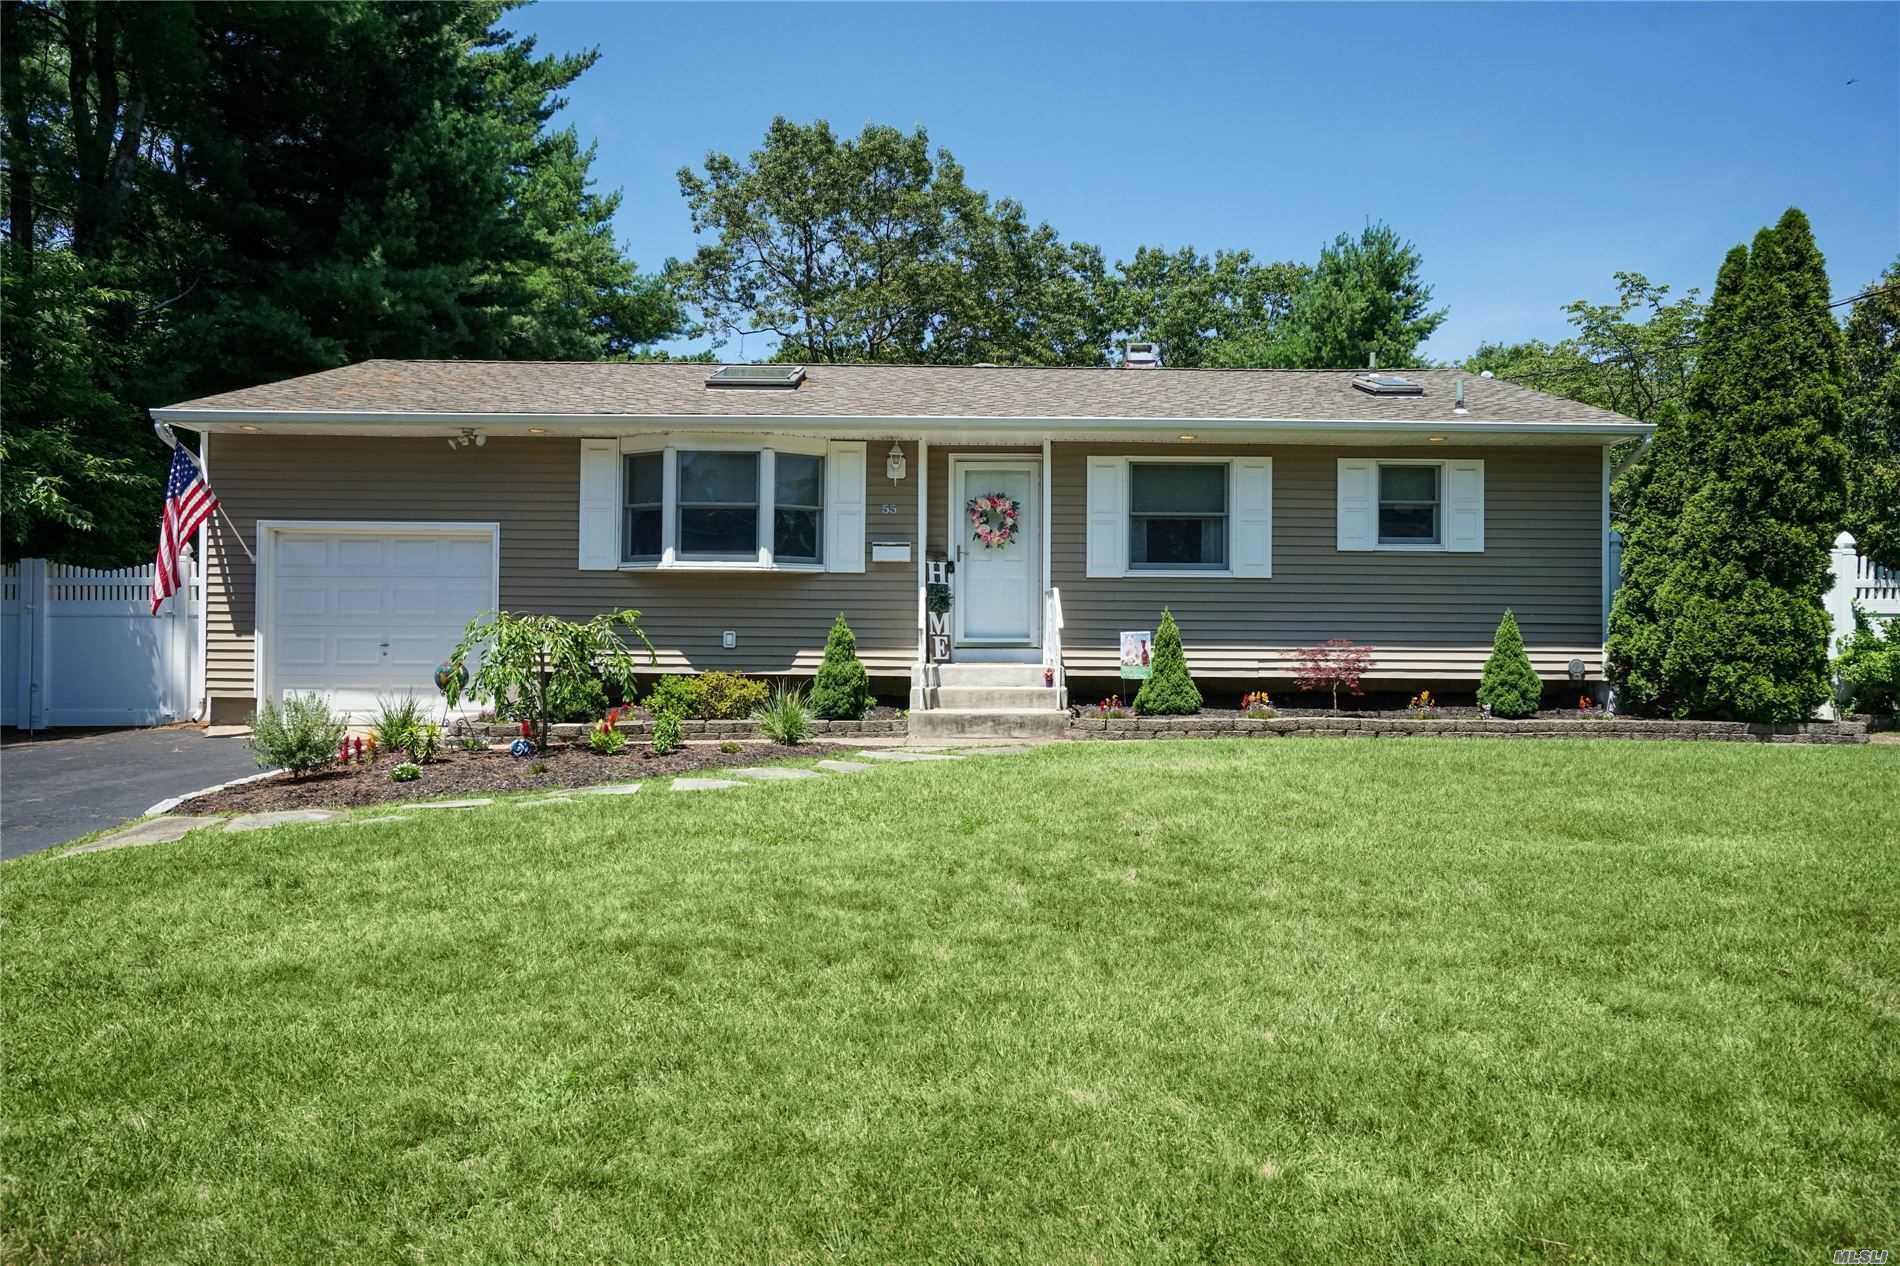 Fully updated ranch in the heart of Islip. Wood floors throughout, granite counter tops, recessed lighting and crown molding. You name it this house has it! Don&rsquo;t forget the central air conditioning, gas heat and in-ground sprinklers! Come see this one before its too late.